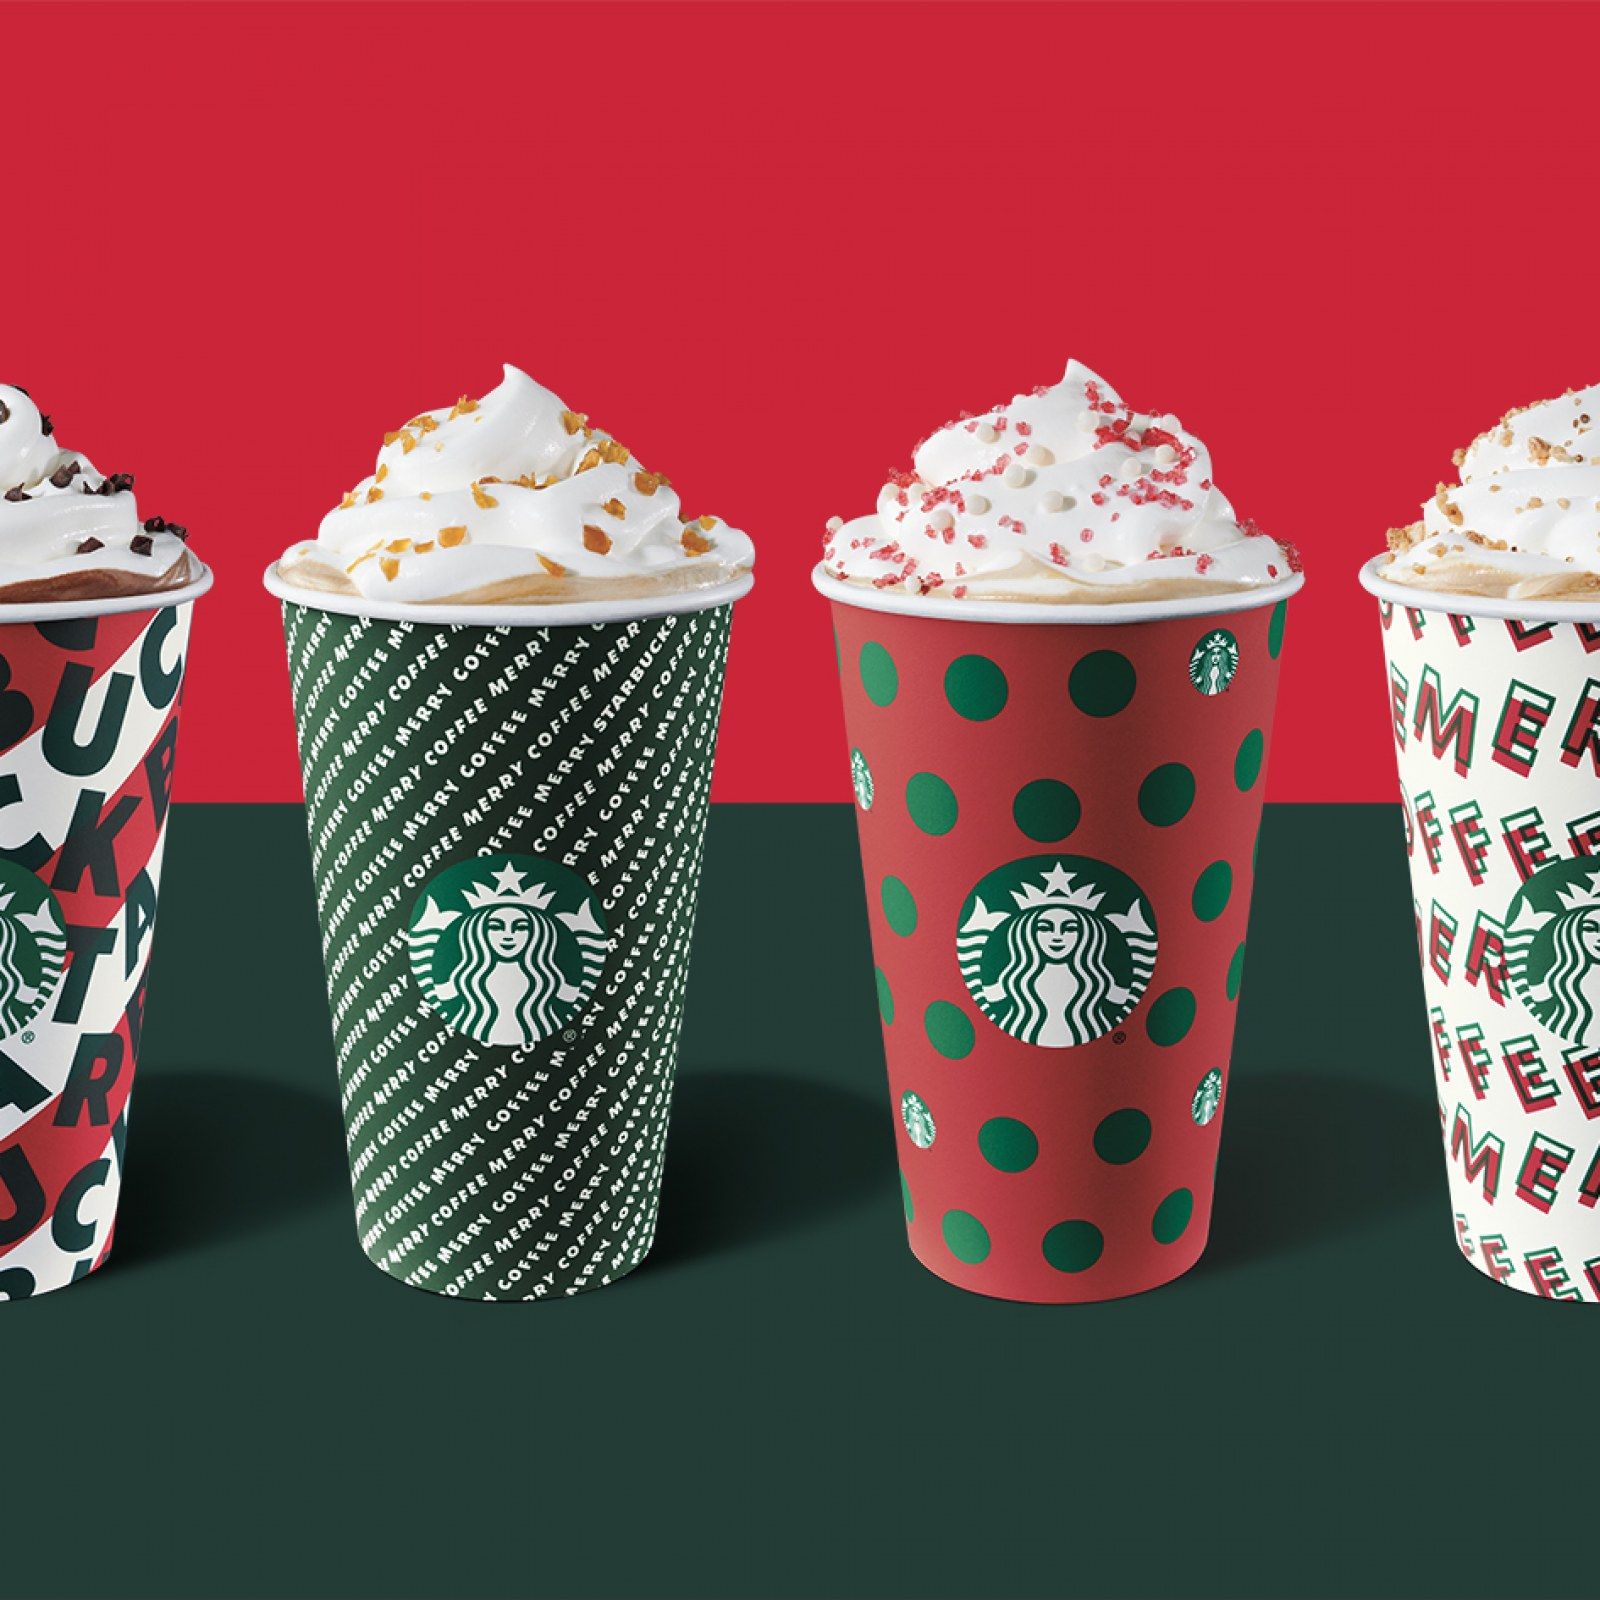 Starbucks Red Cups 2019: What Christmas Holiday Drinks are Available This Year?